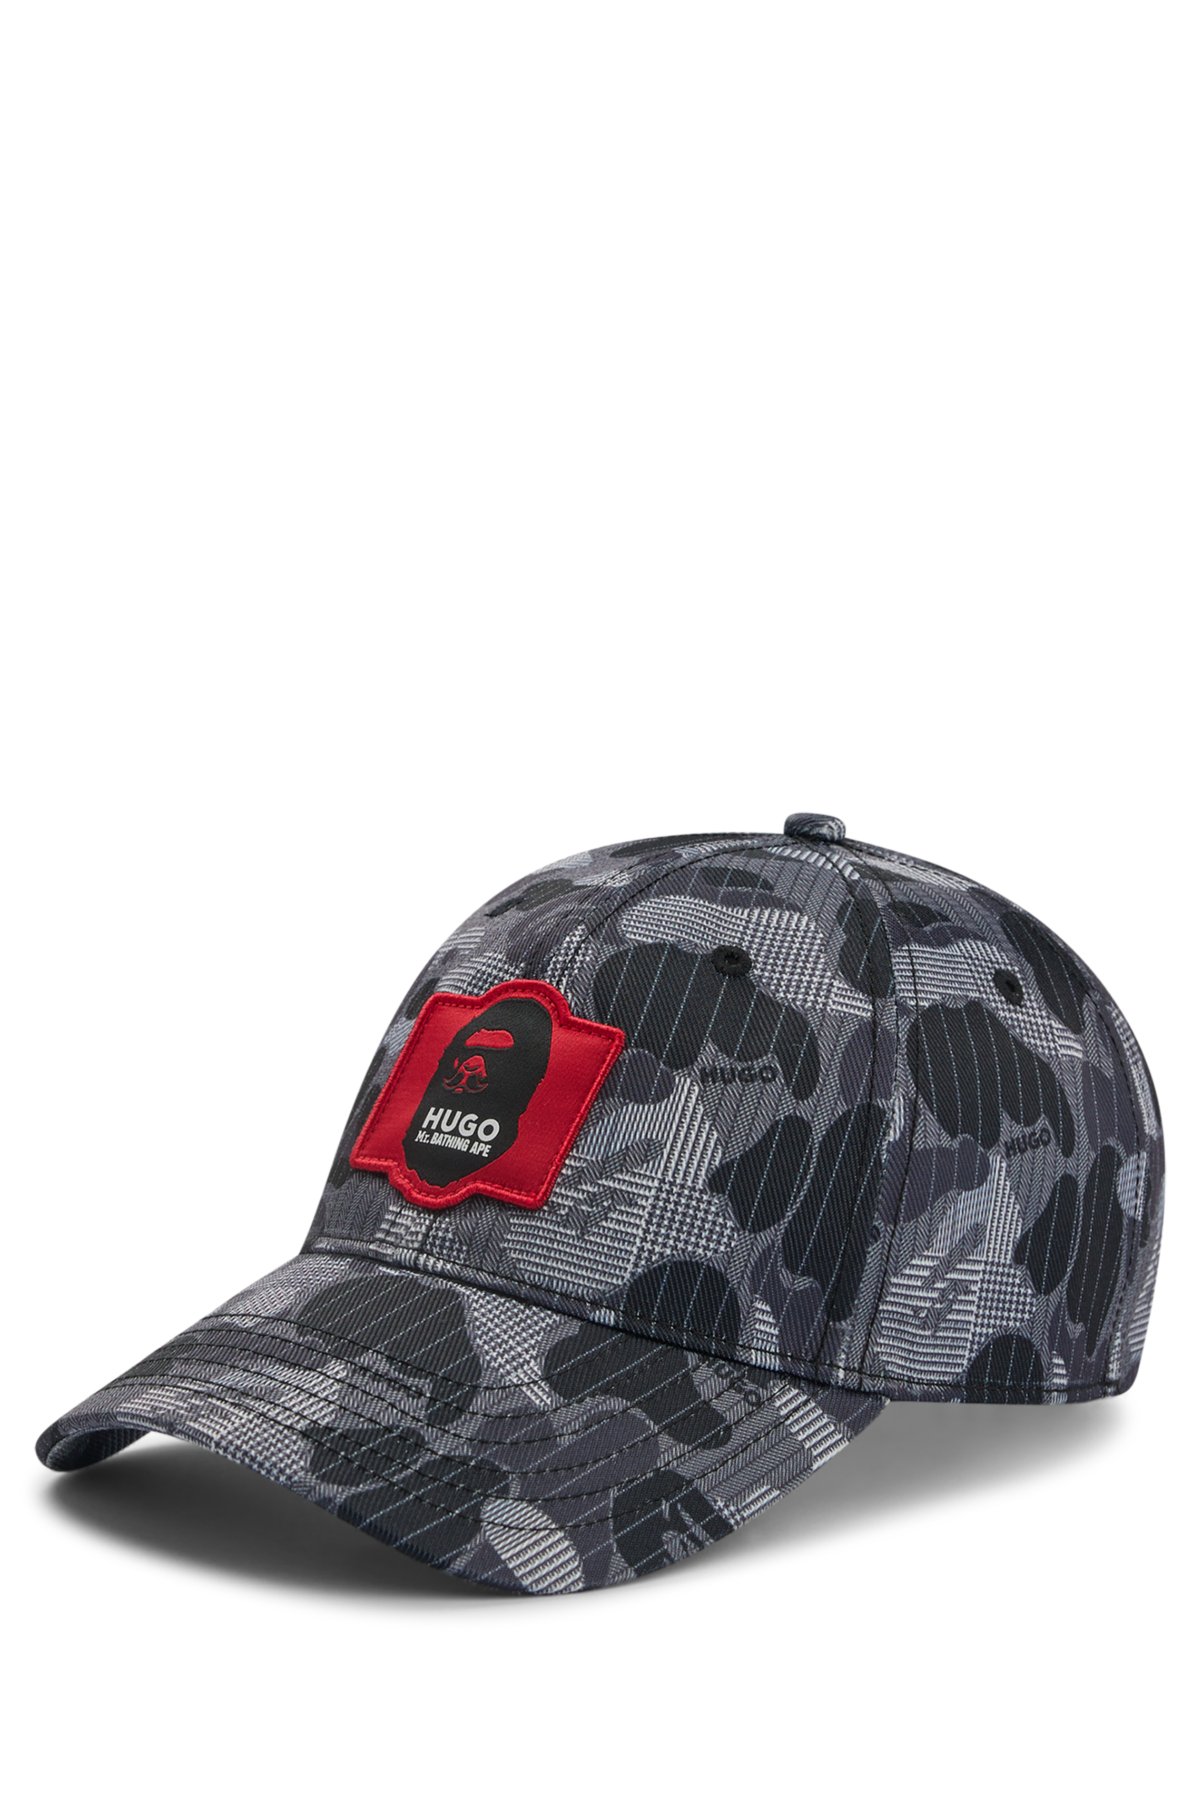 HUGO - Cotton-poplin cap with camouflage pattern and collaborative